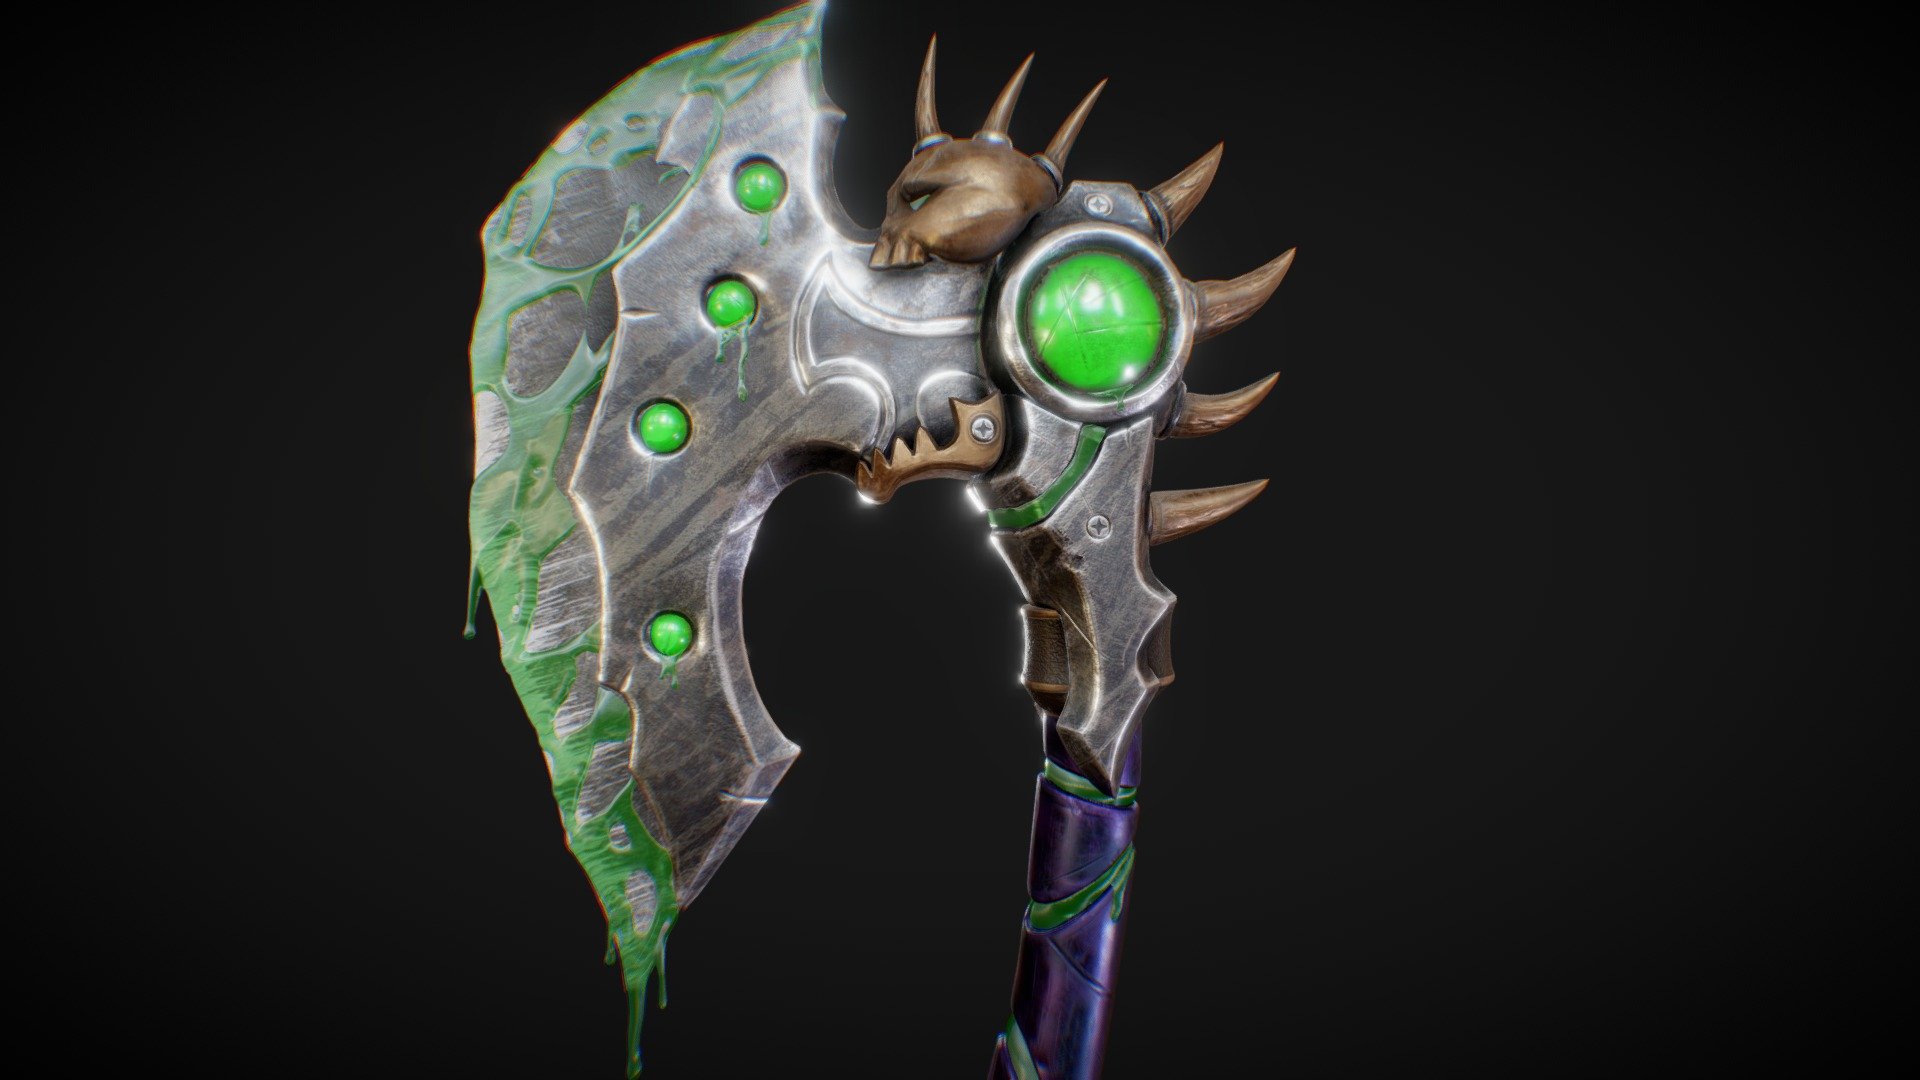 A small side project I did for fun 
based on a concept by Yağız Kâni
check out his work at - https://www.artstation.com/artwork/dOJydA - Venemous Axe - Buy Royalty Free 3D model by Deftroy 3d model